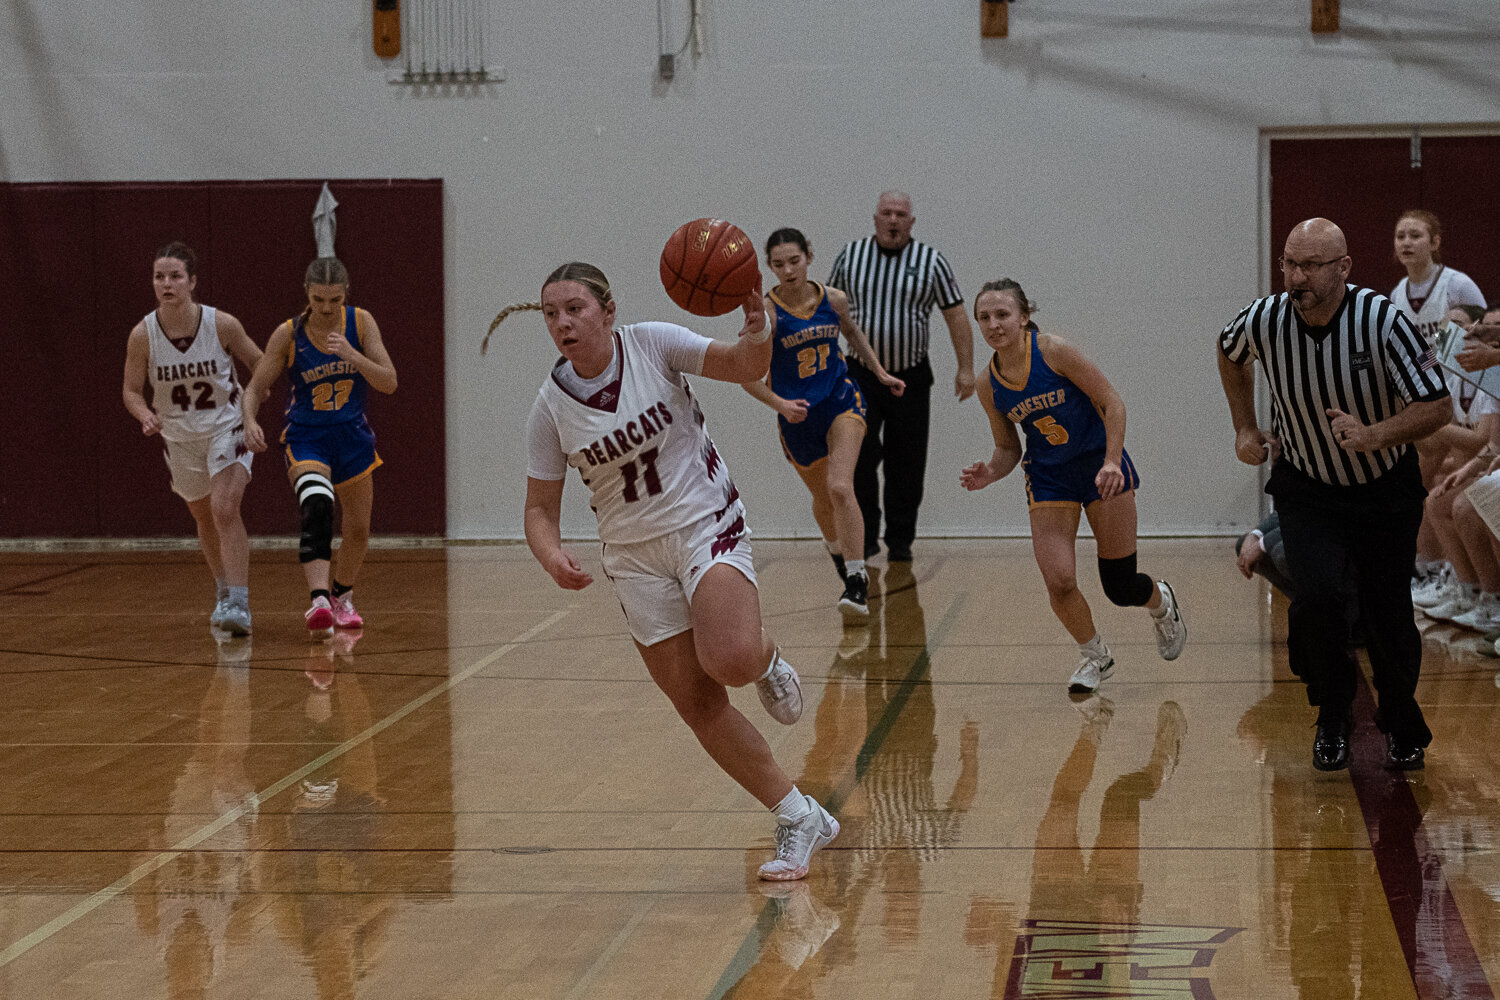 Lena Fragner brings the ball up the court after a steal during W.F. West's win over Rochester on Dec. 6.